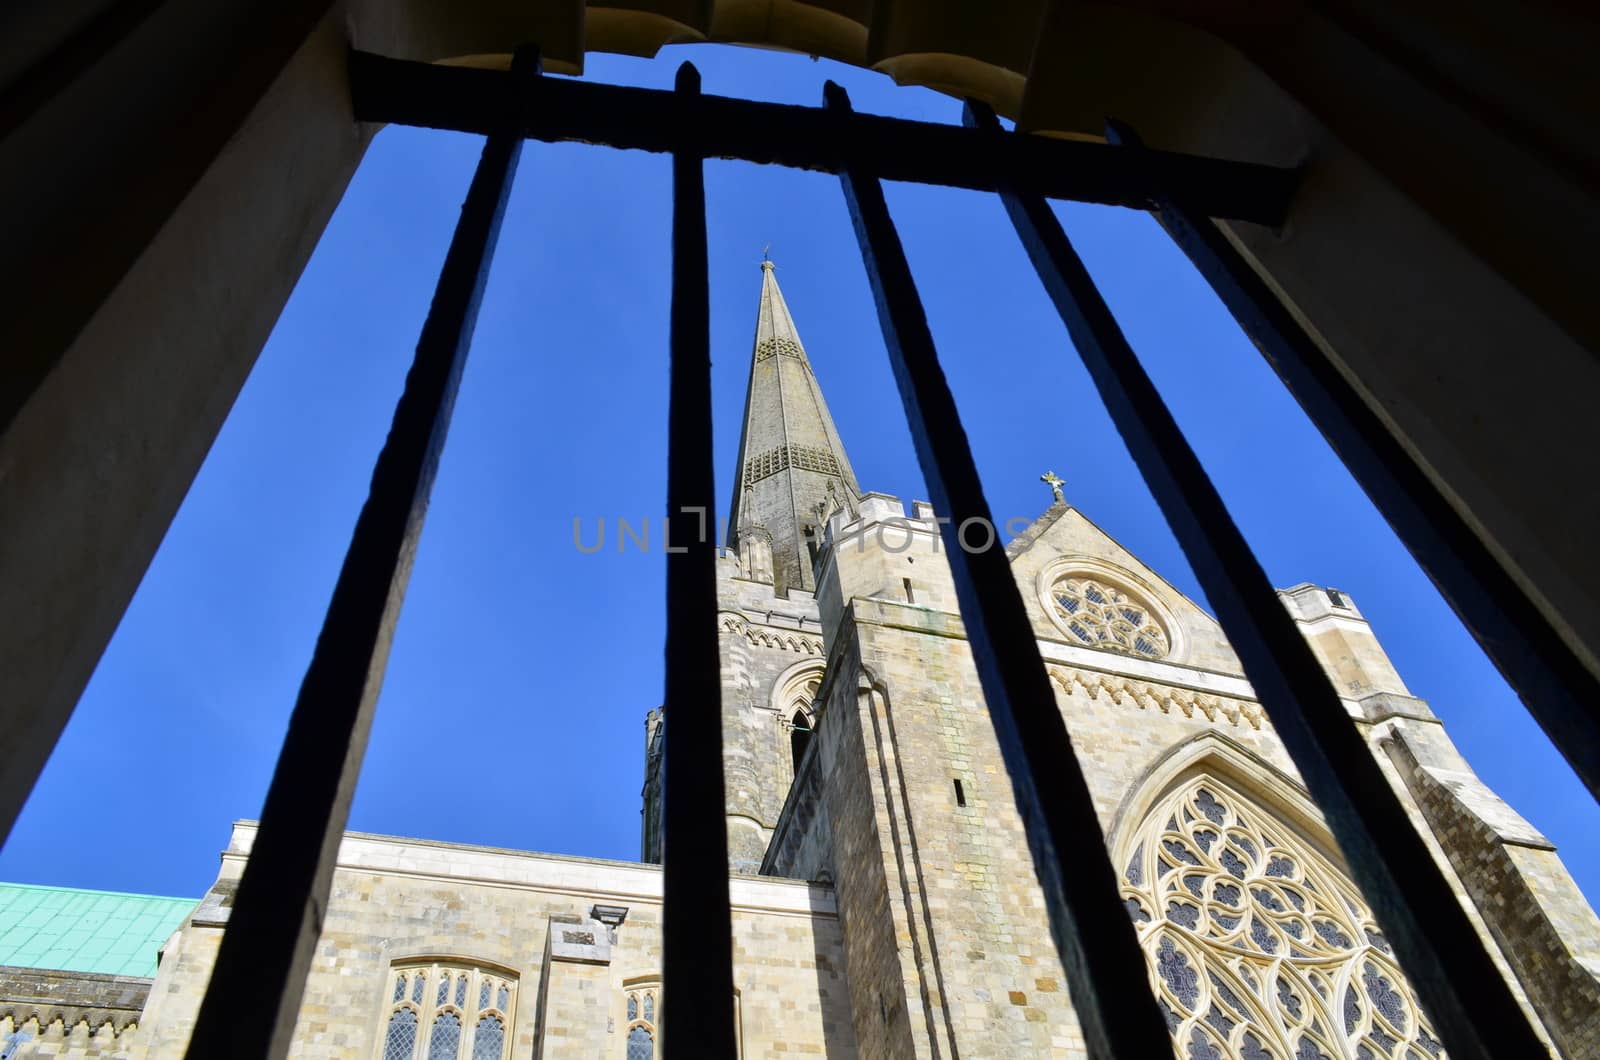 A view through iron railings of Chichester Cathedral and its majestic steeple.